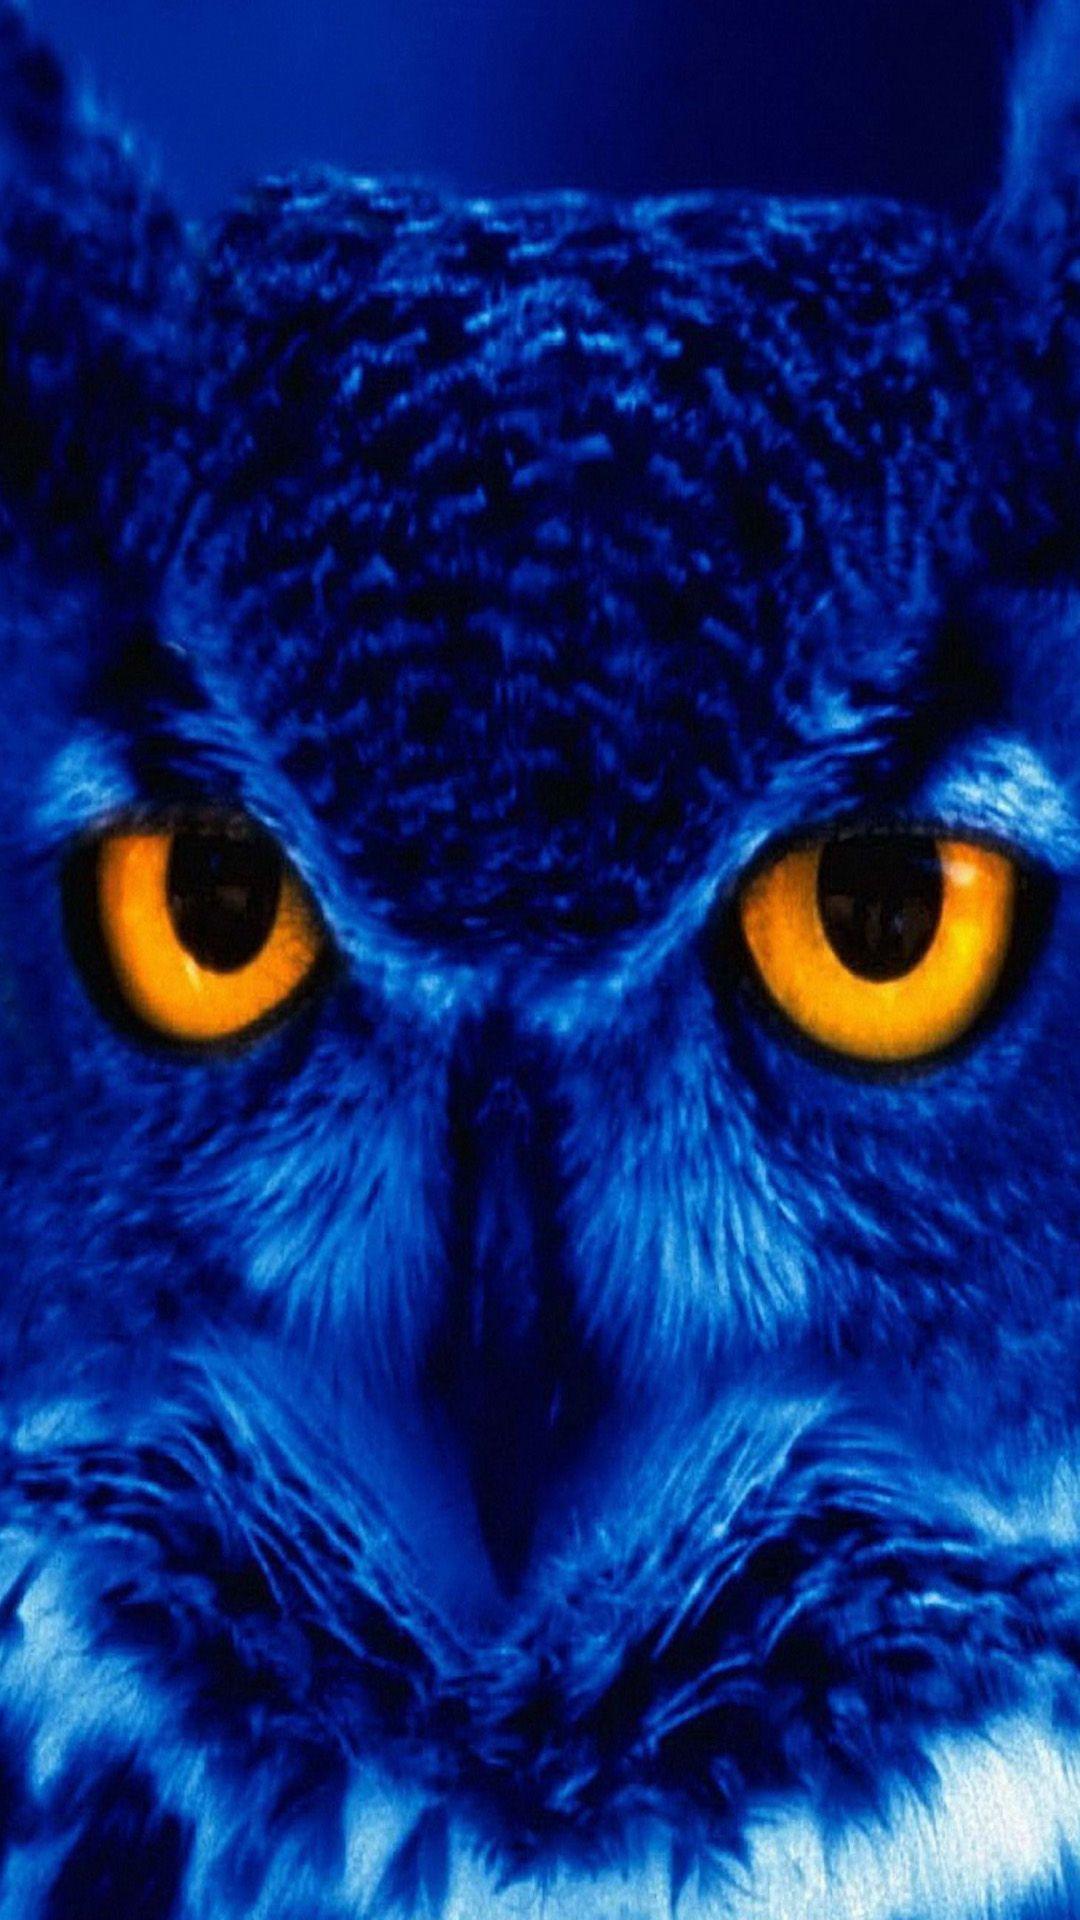 Owl iPhone Wallpapers - Top Free Owl iPhone Backgrounds ...